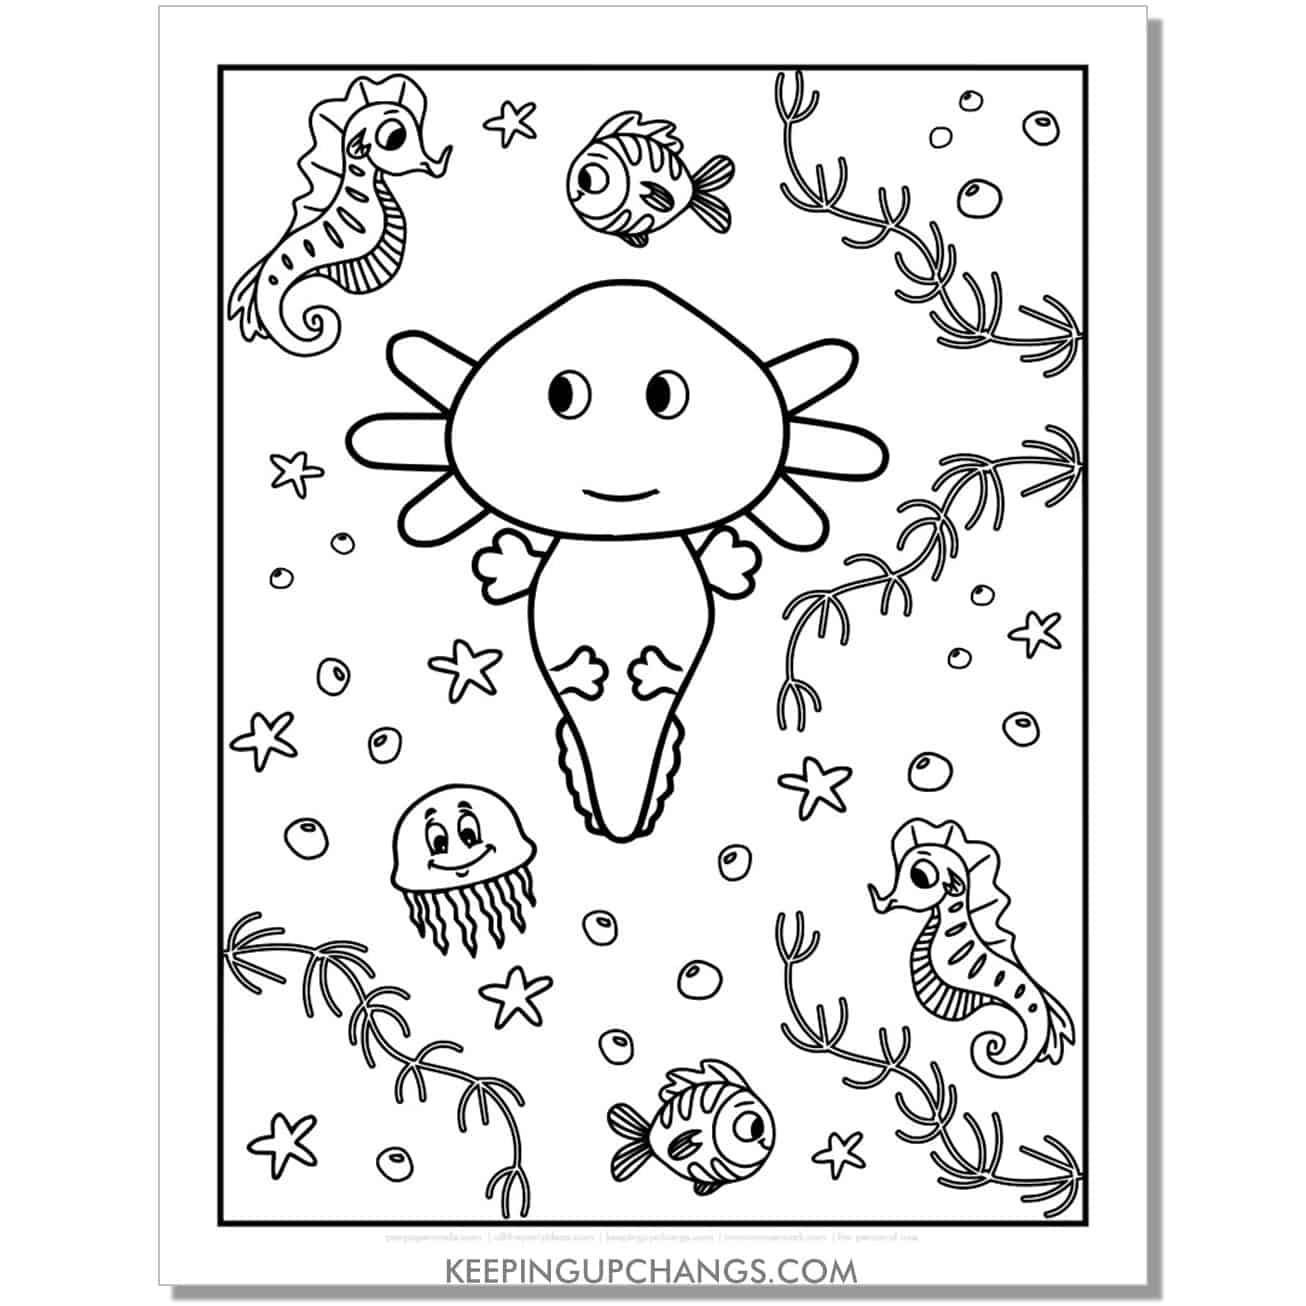 free cartoon illustrated axolotl coloring page, colouring sheet with seahorse, jellyfish.